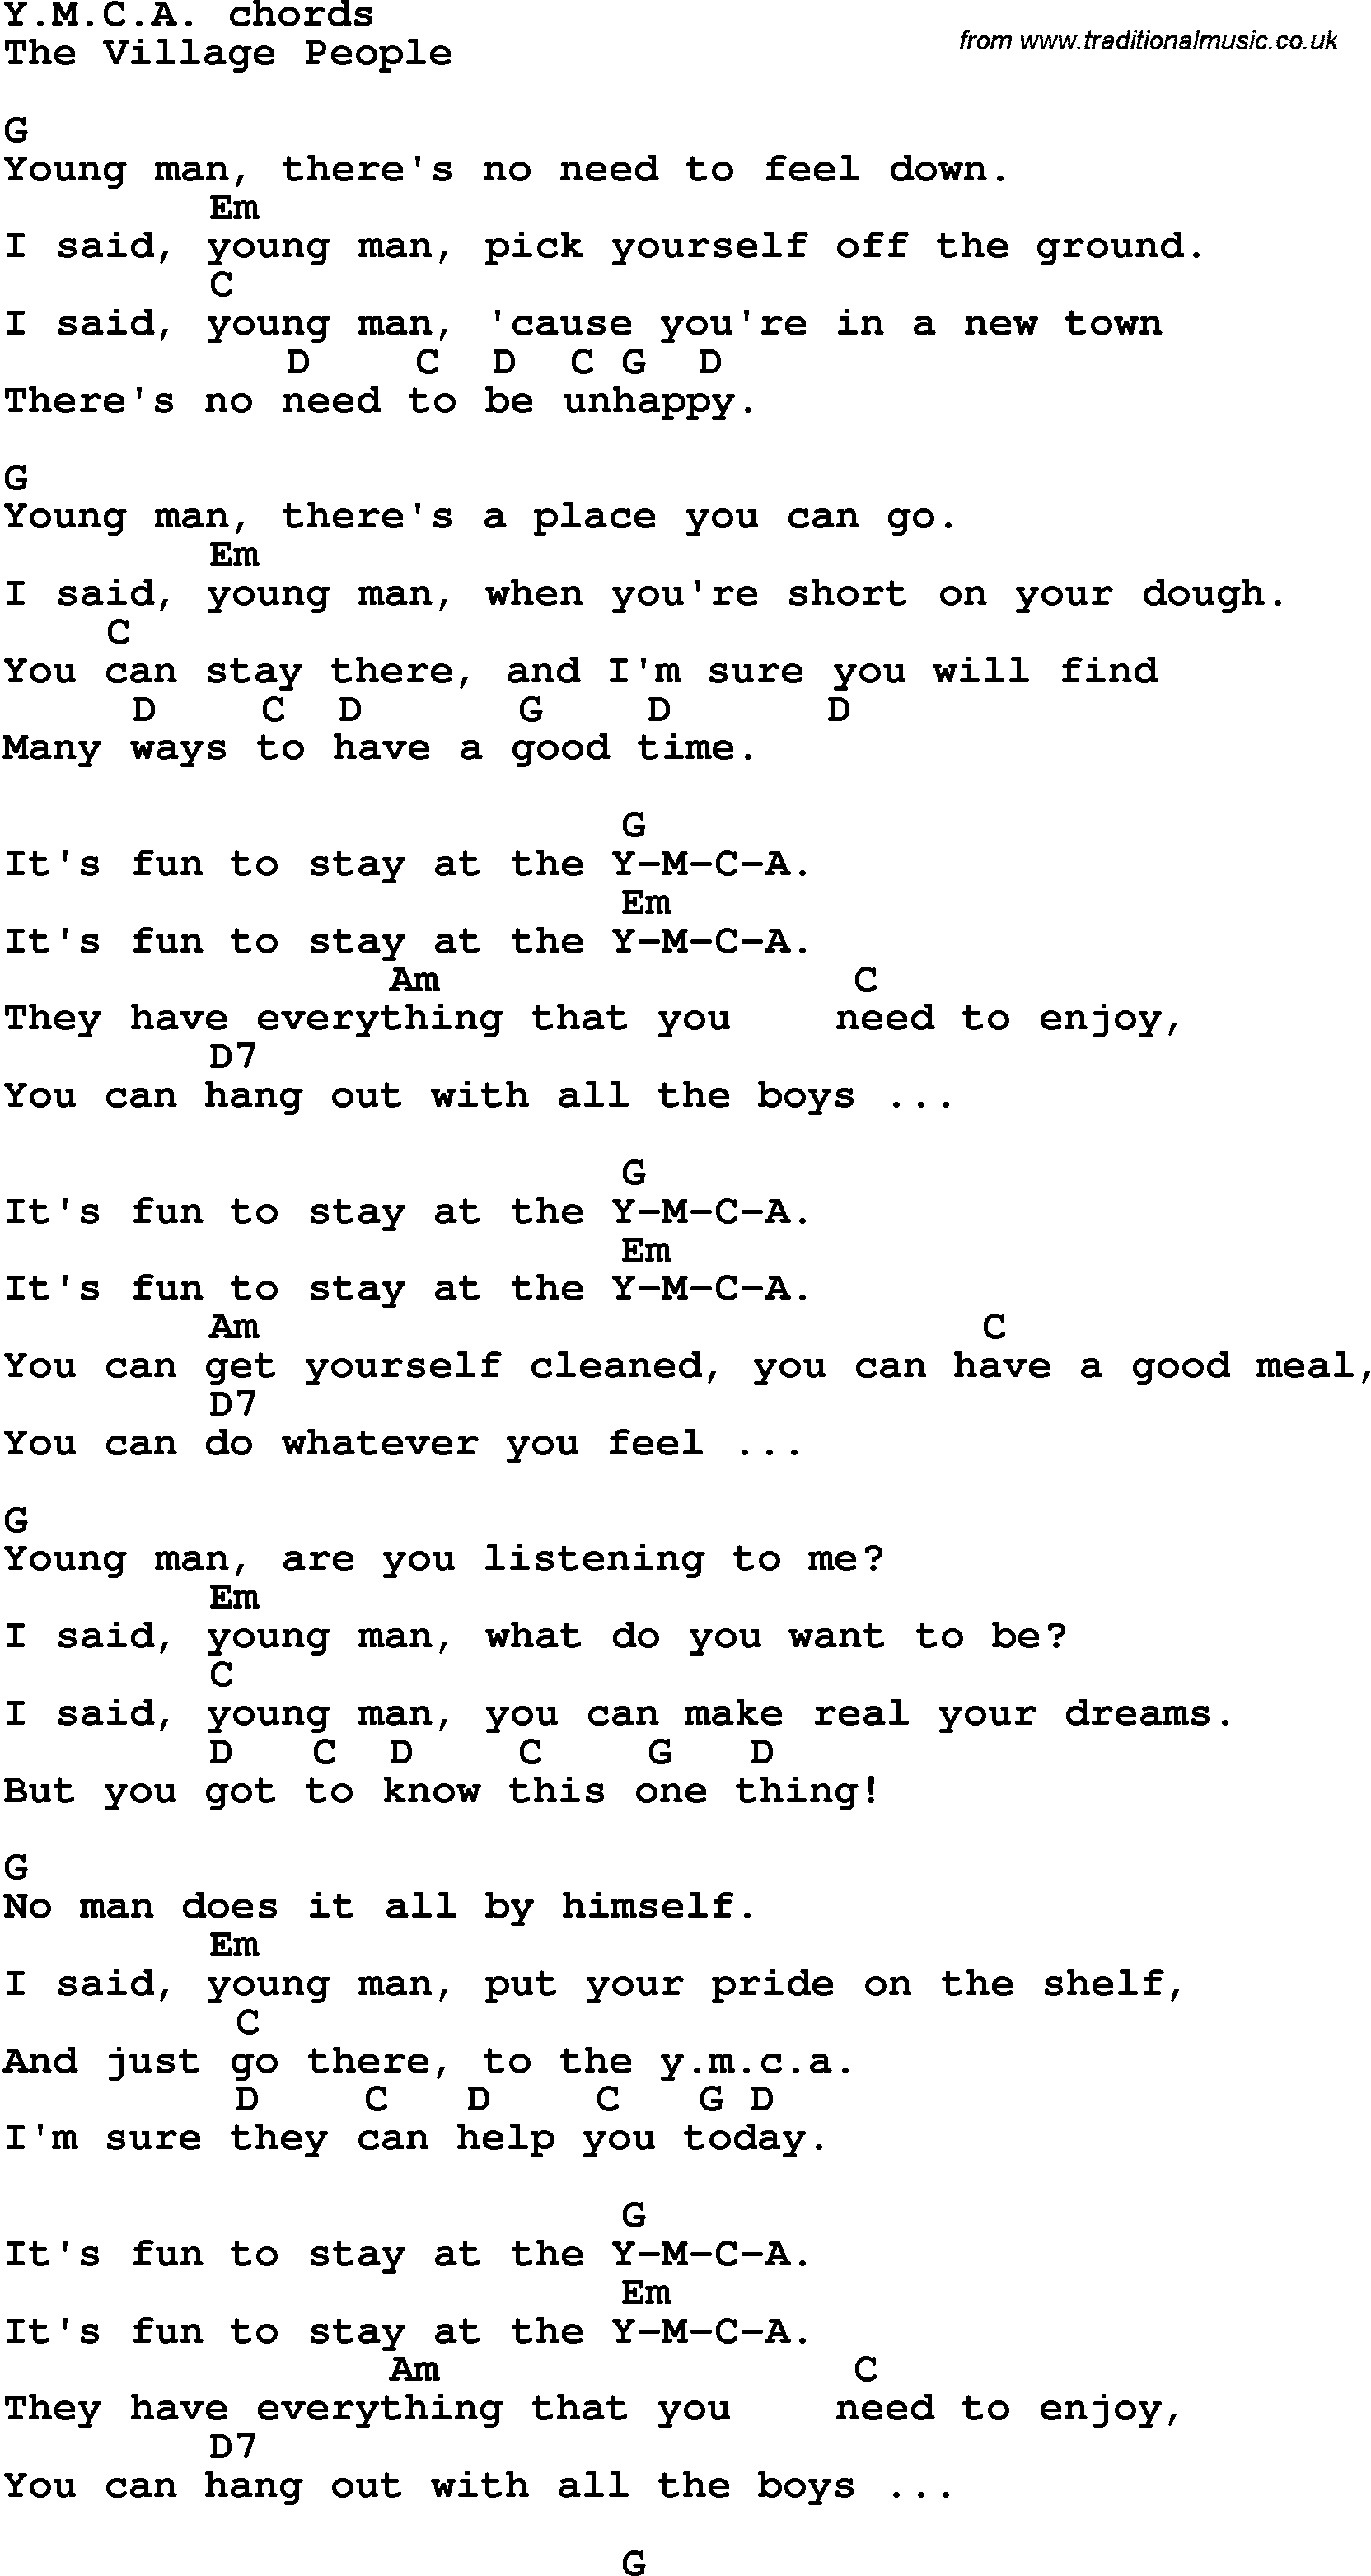 Song Lyrics with guitar chords for Ymca - The Village People